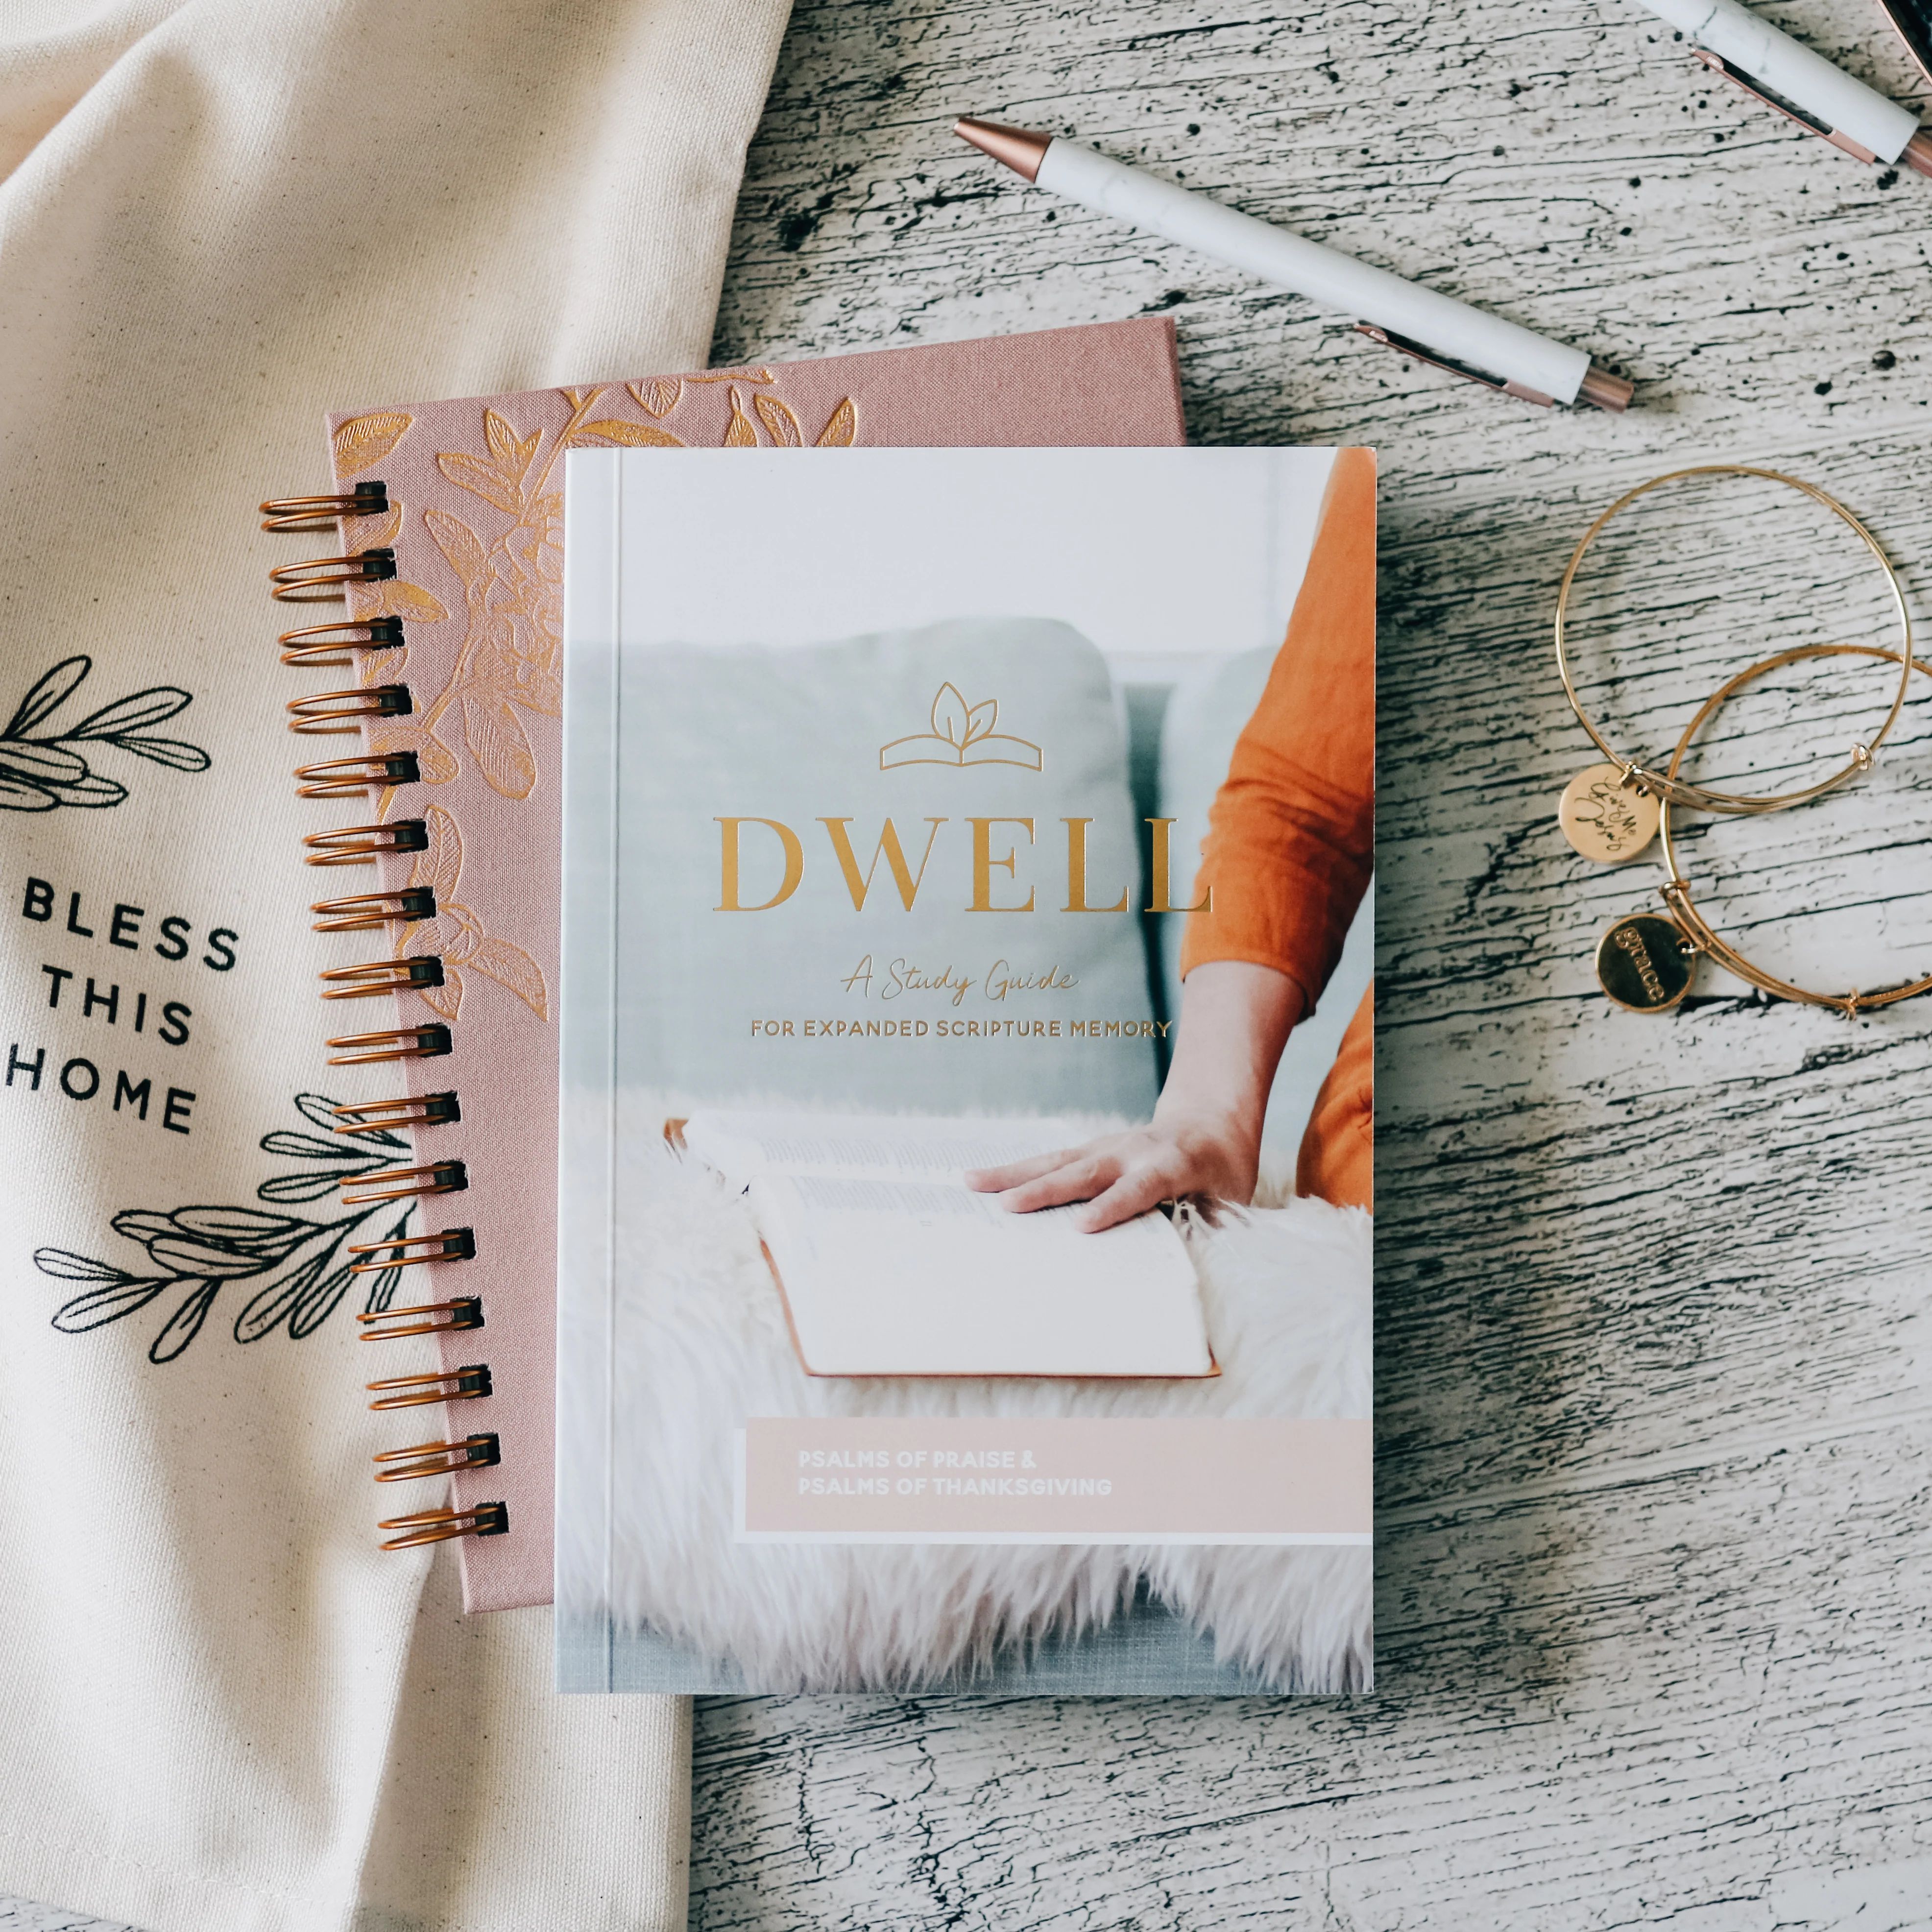 Dwell Scripture Memory Journal | Psalms | The Daily Grace Co.